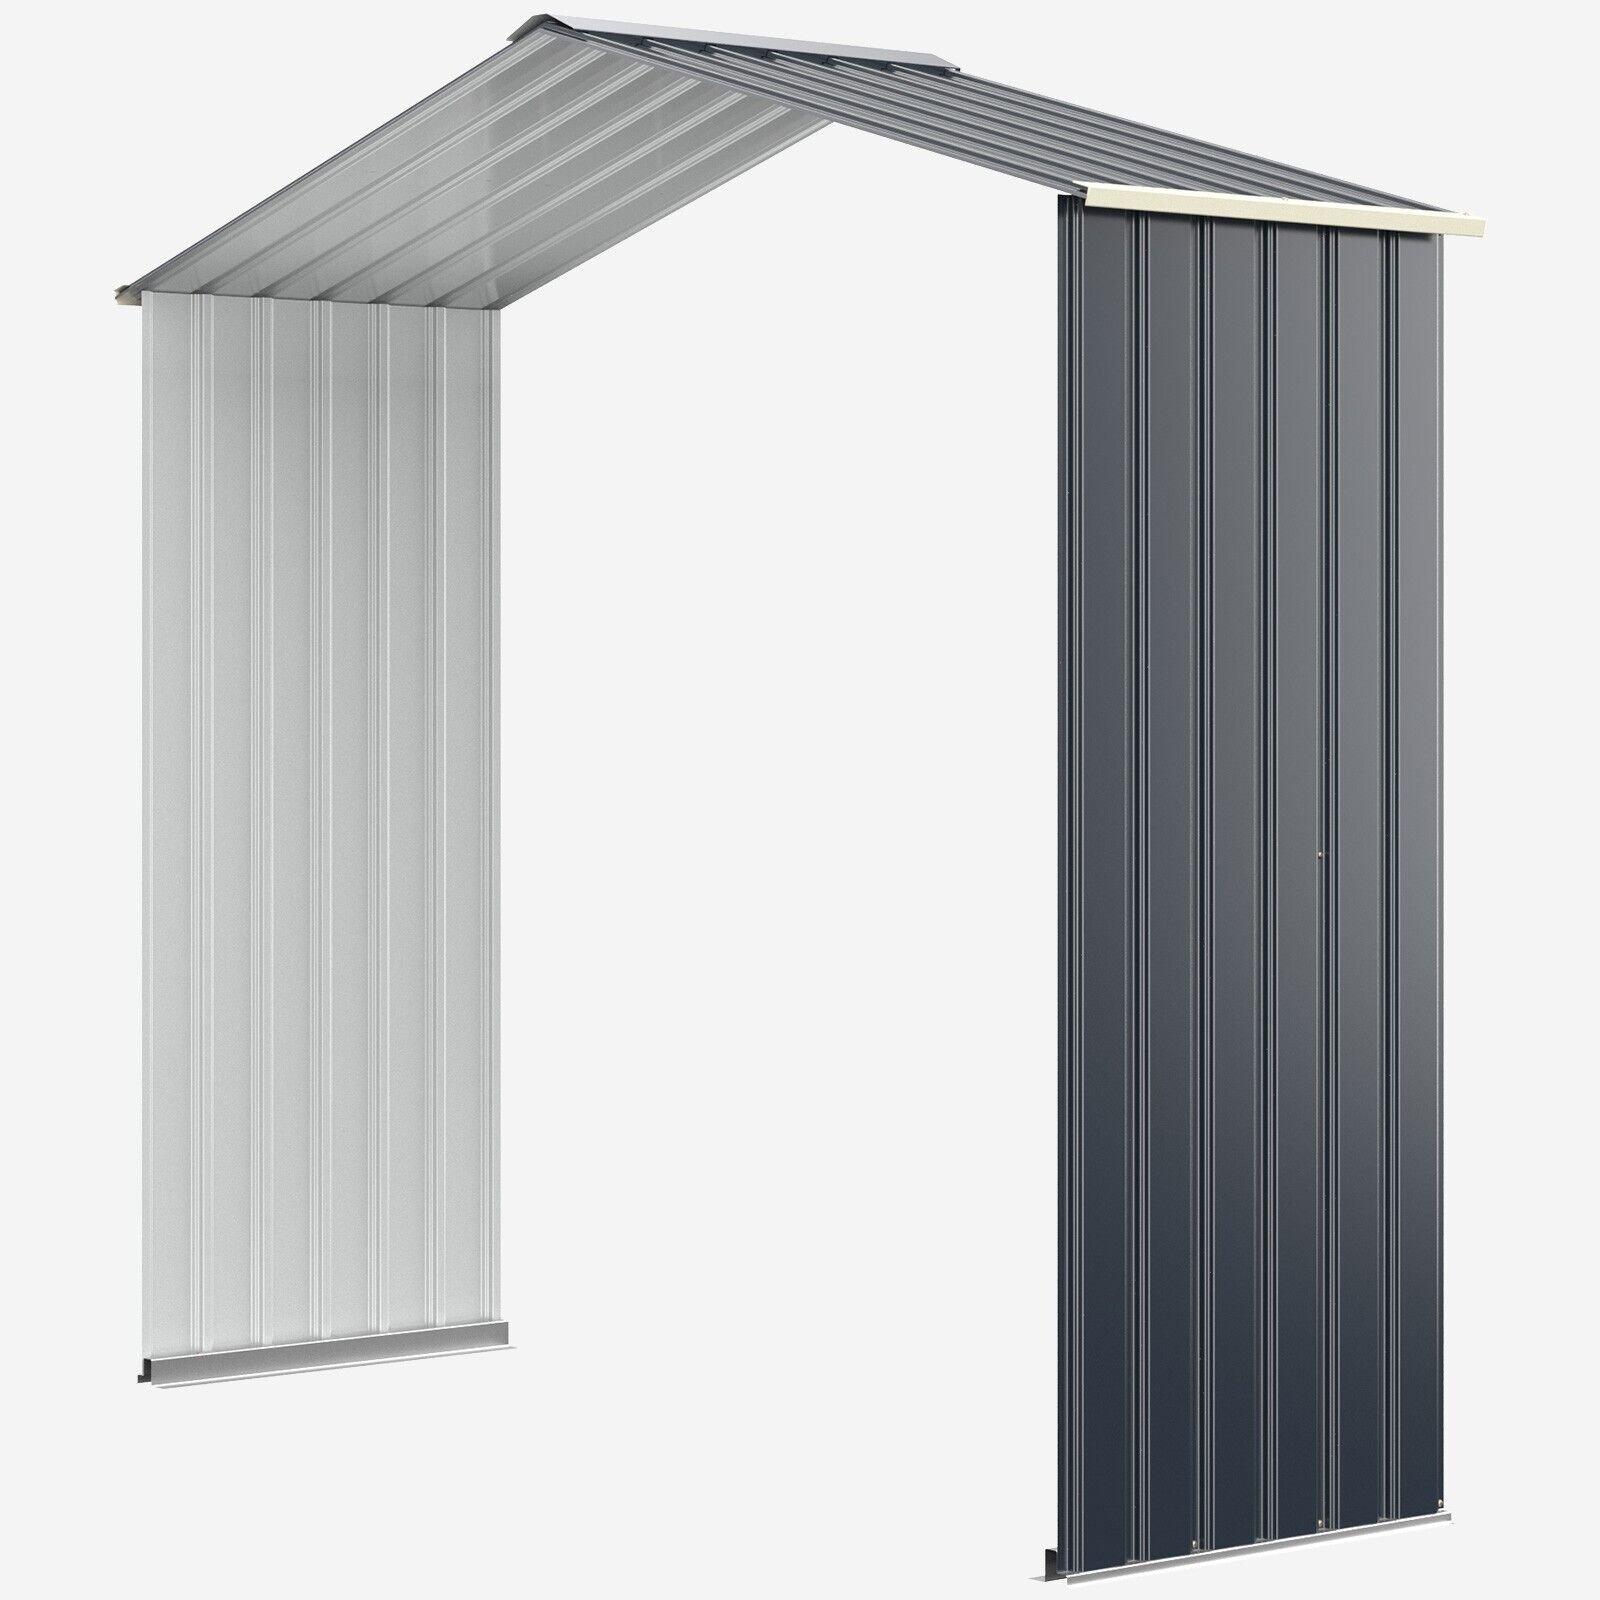 Outdoor Storage Shed Extension Kit for 195 cm Shed Width Increased Storage Space